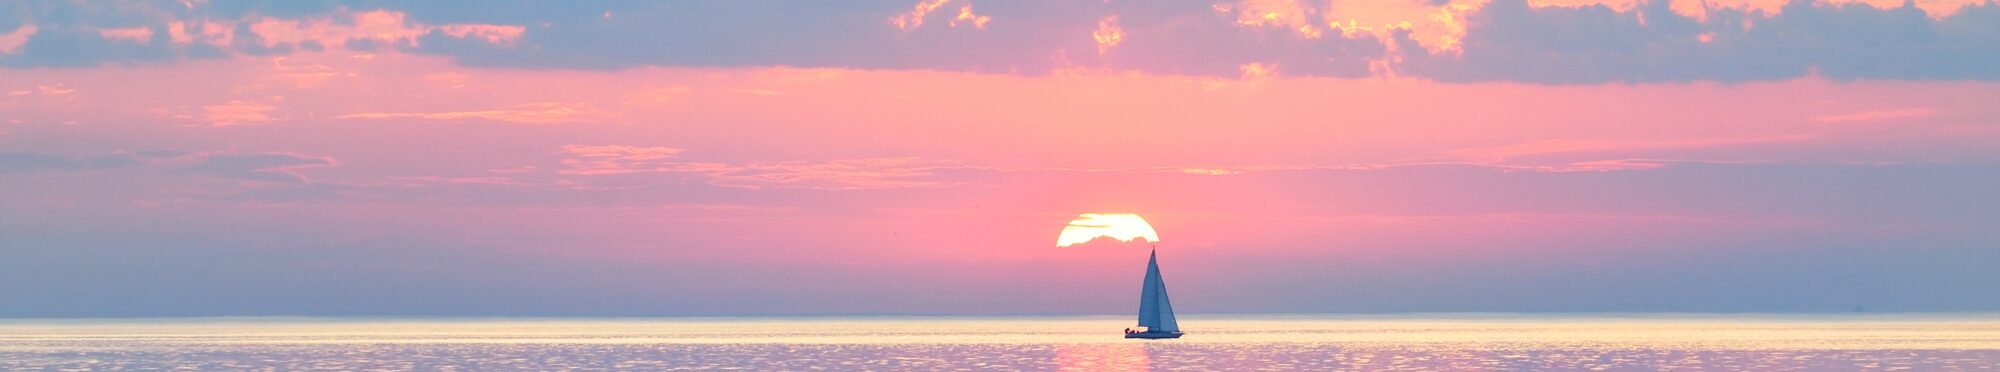 Sloop rigged yacht sailing in an open Baltic sea at sunset. Colorful evening sky. Stunning seascape